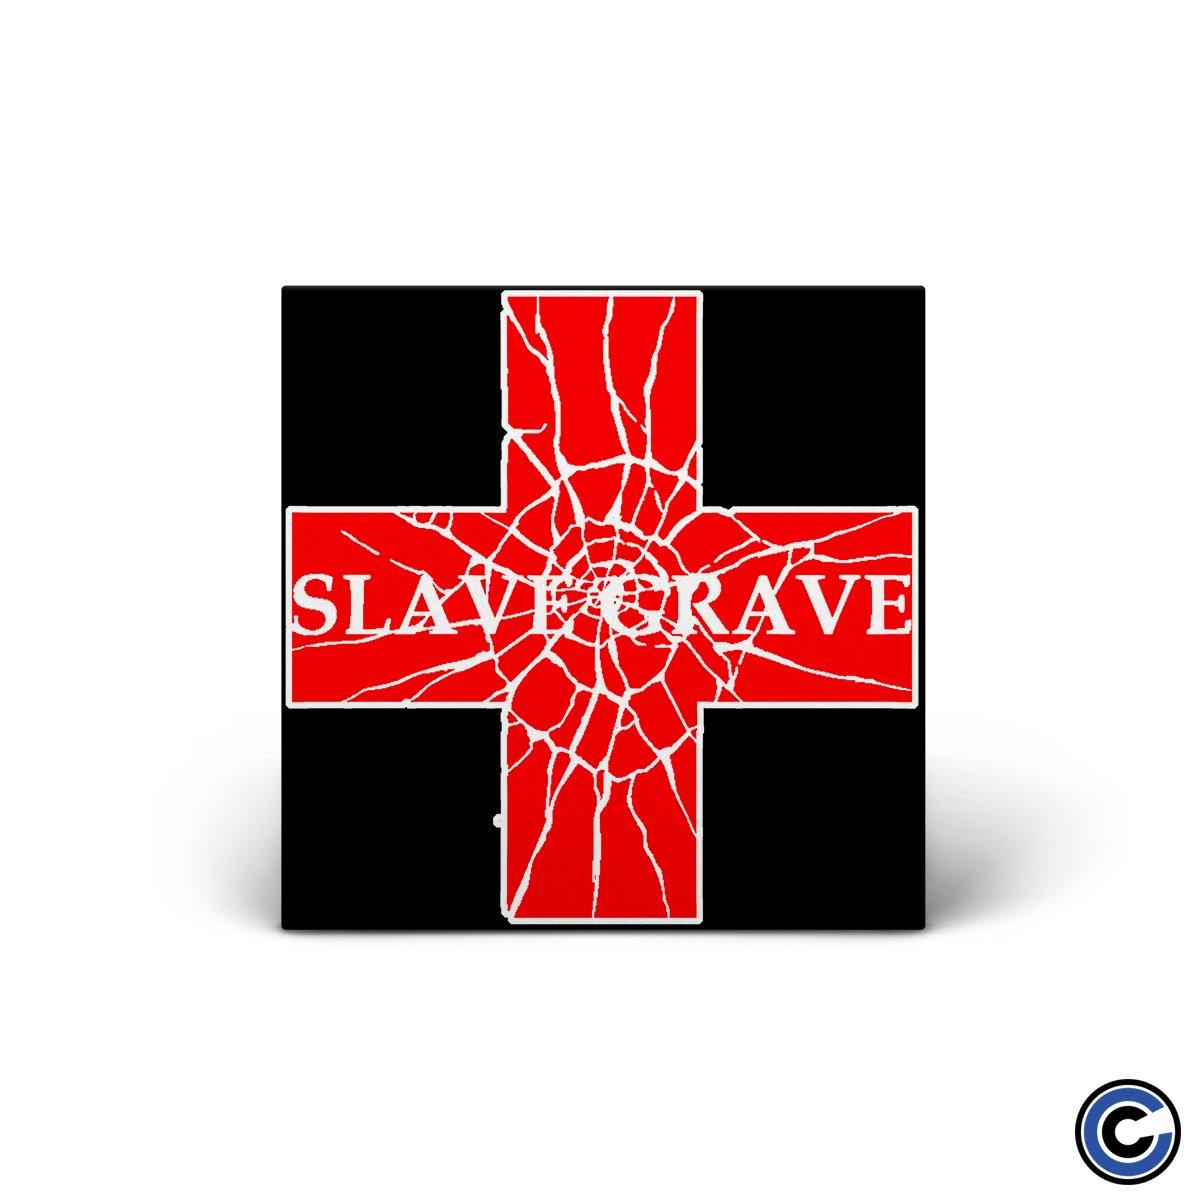 Buy – Slave Grave "Bred to Death" 7" – Band & Music Merch – Cold Cuts Merch